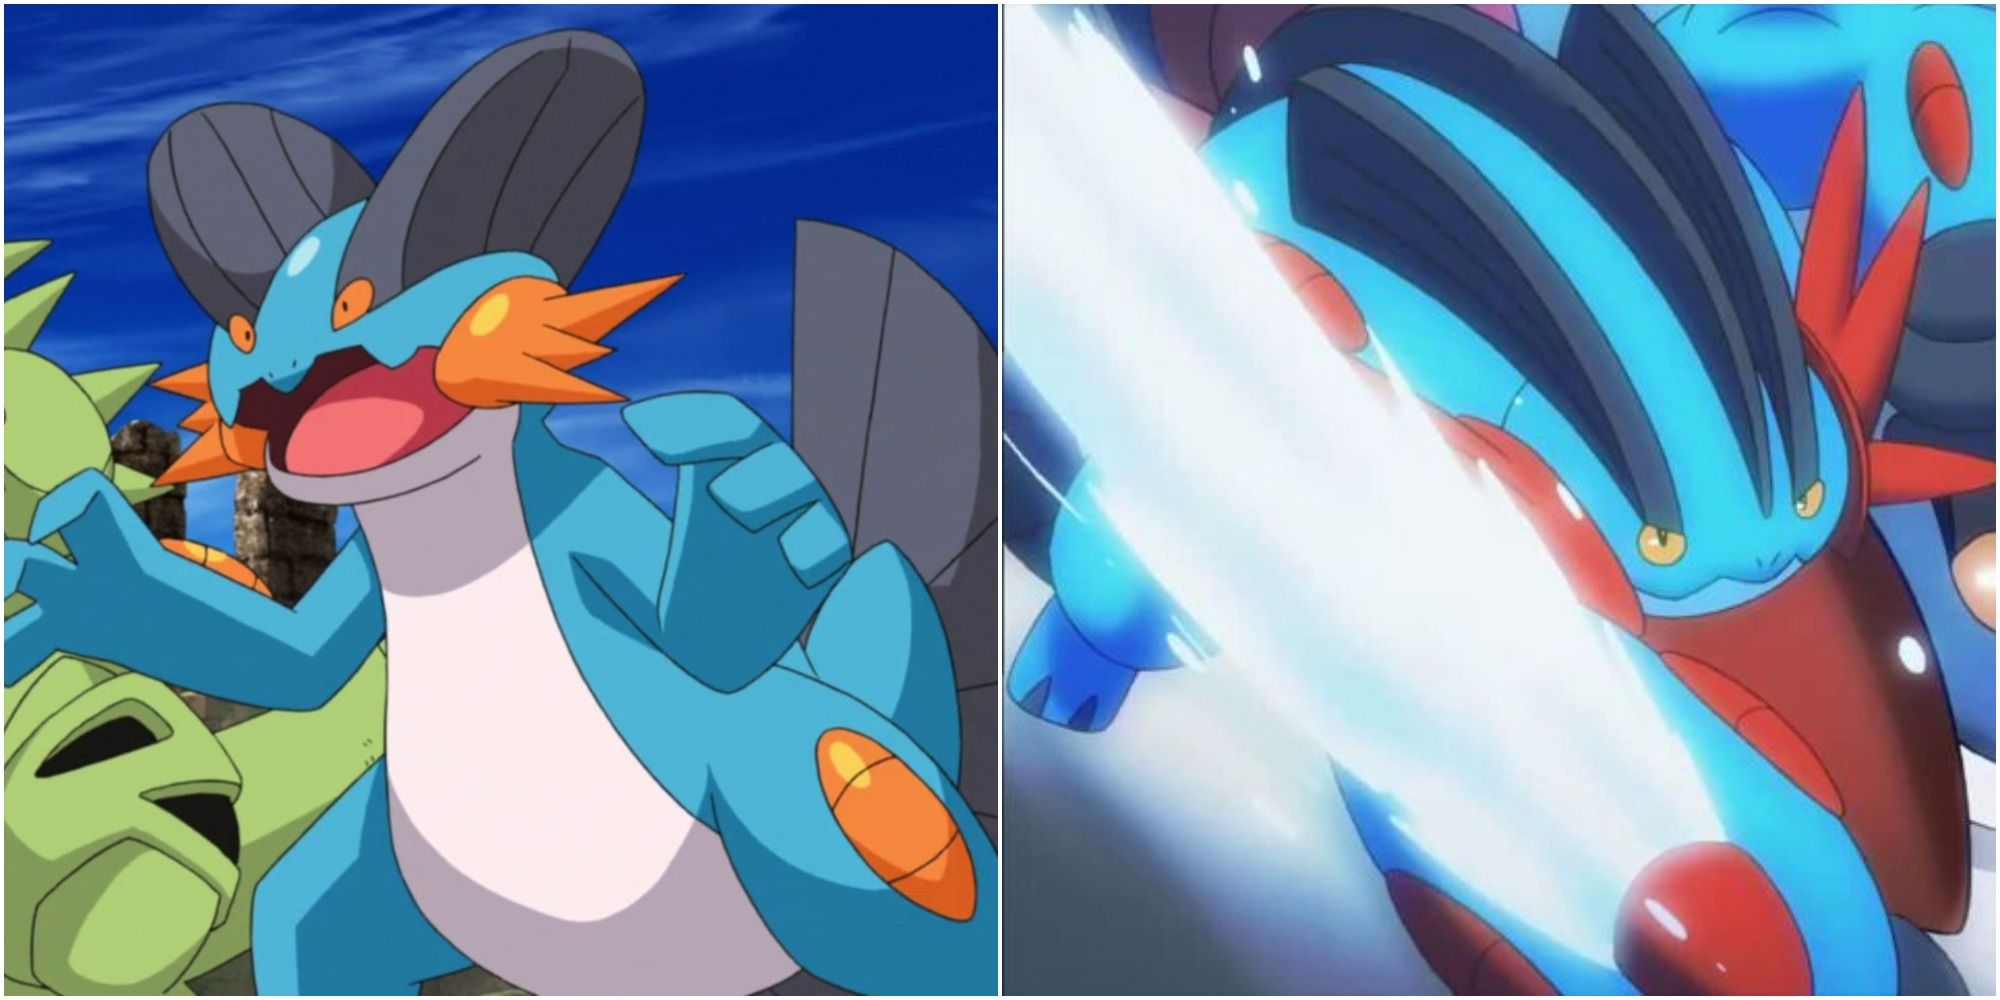 Who is better: Charizard or Swampert? Why? - Quora